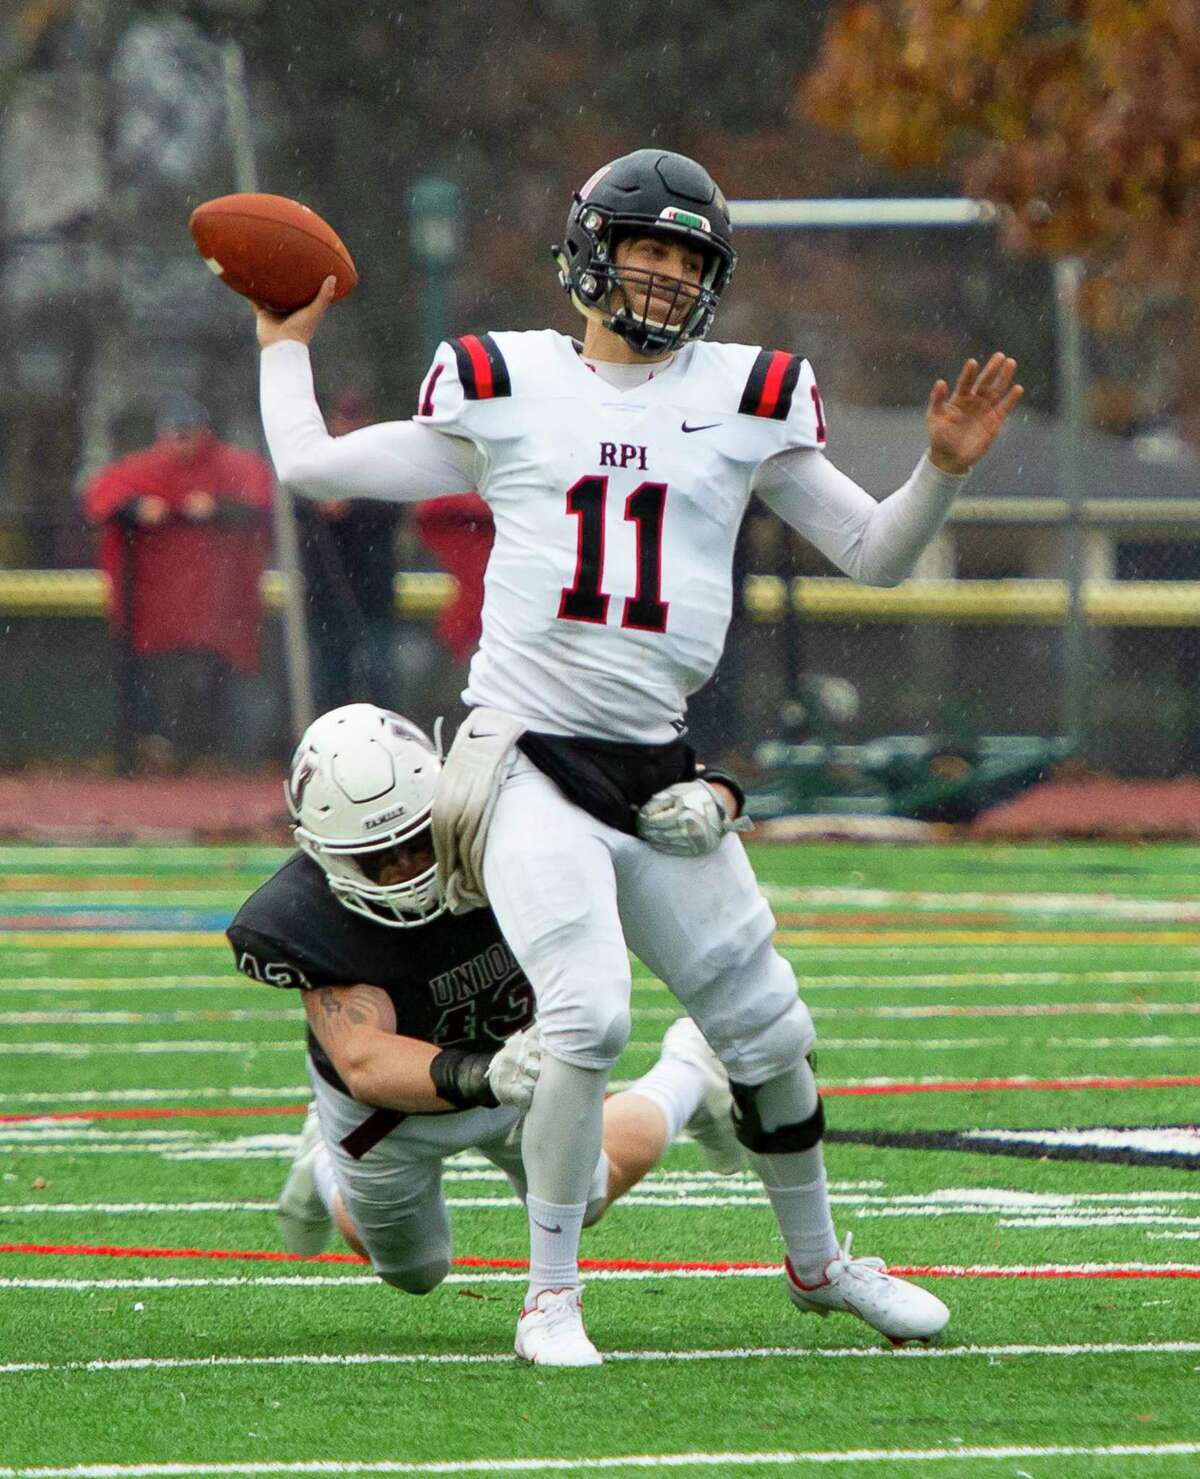 RPI quarterback George Marinopoulis throws the ball as is brought down by Union linebacker Colin Lama during the Dutchman Shoes game at Union College in Schenectady, N.Y., Saturday, Nov. 13, 2021. (Jenn March, Special to the Times Union)